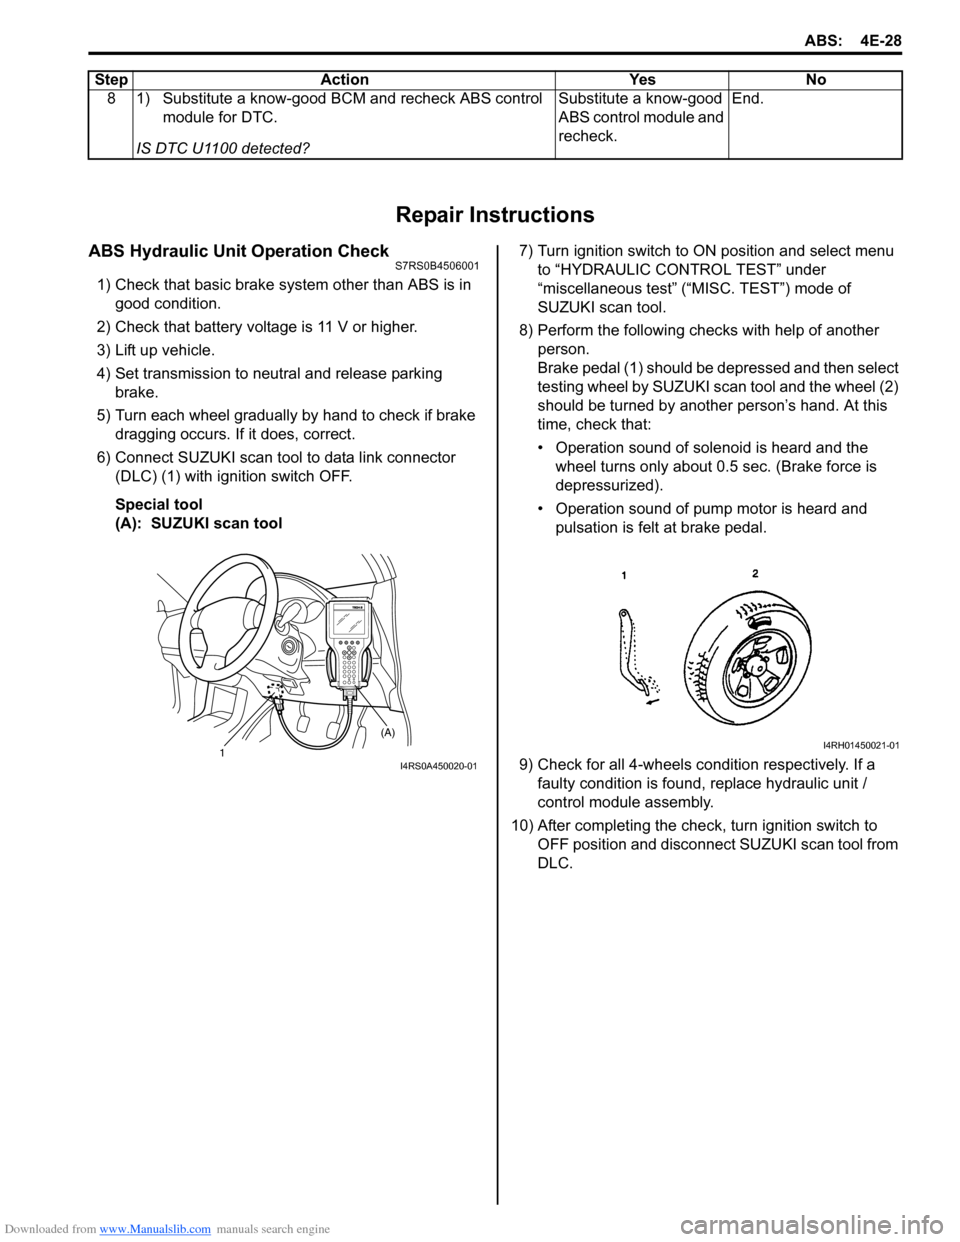 SUZUKI SWIFT 2004 2.G Service Workshop Manual Downloaded from www.Manualslib.com manuals search engine ABS: 4E-28
Repair Instructions
ABS Hydraulic Unit Operation CheckS7RS0B4506001
1) Check that basic brake system other than ABS is in good condi